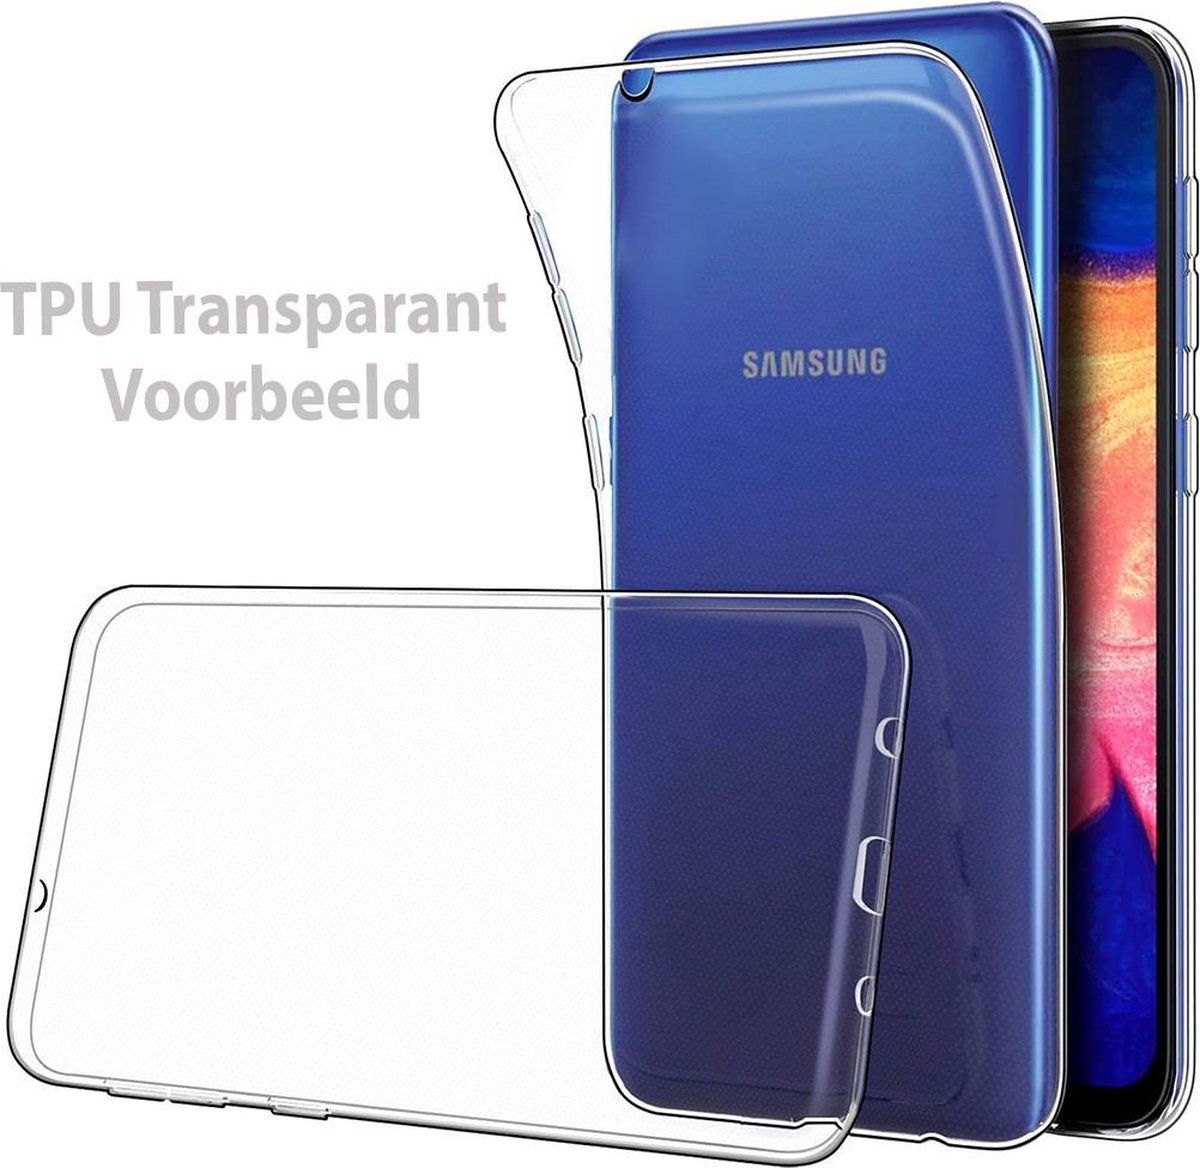 MG siliconen cover voor Samsung A20 - Transparant